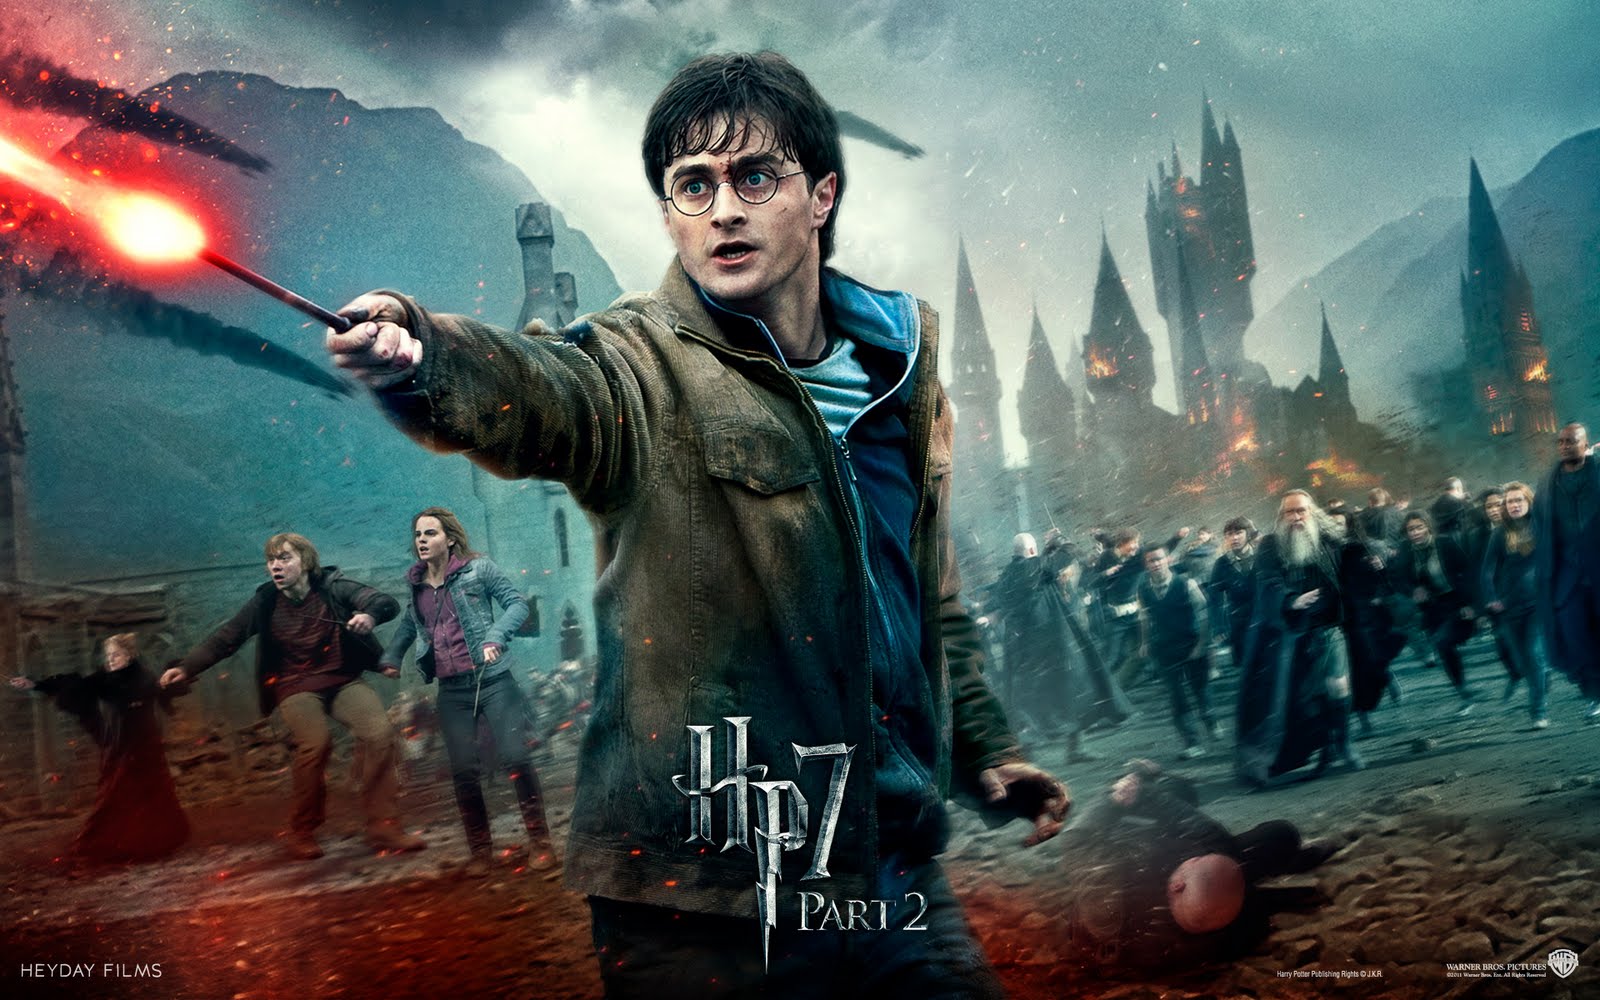 Harry Potter leads the battle against Voldemort